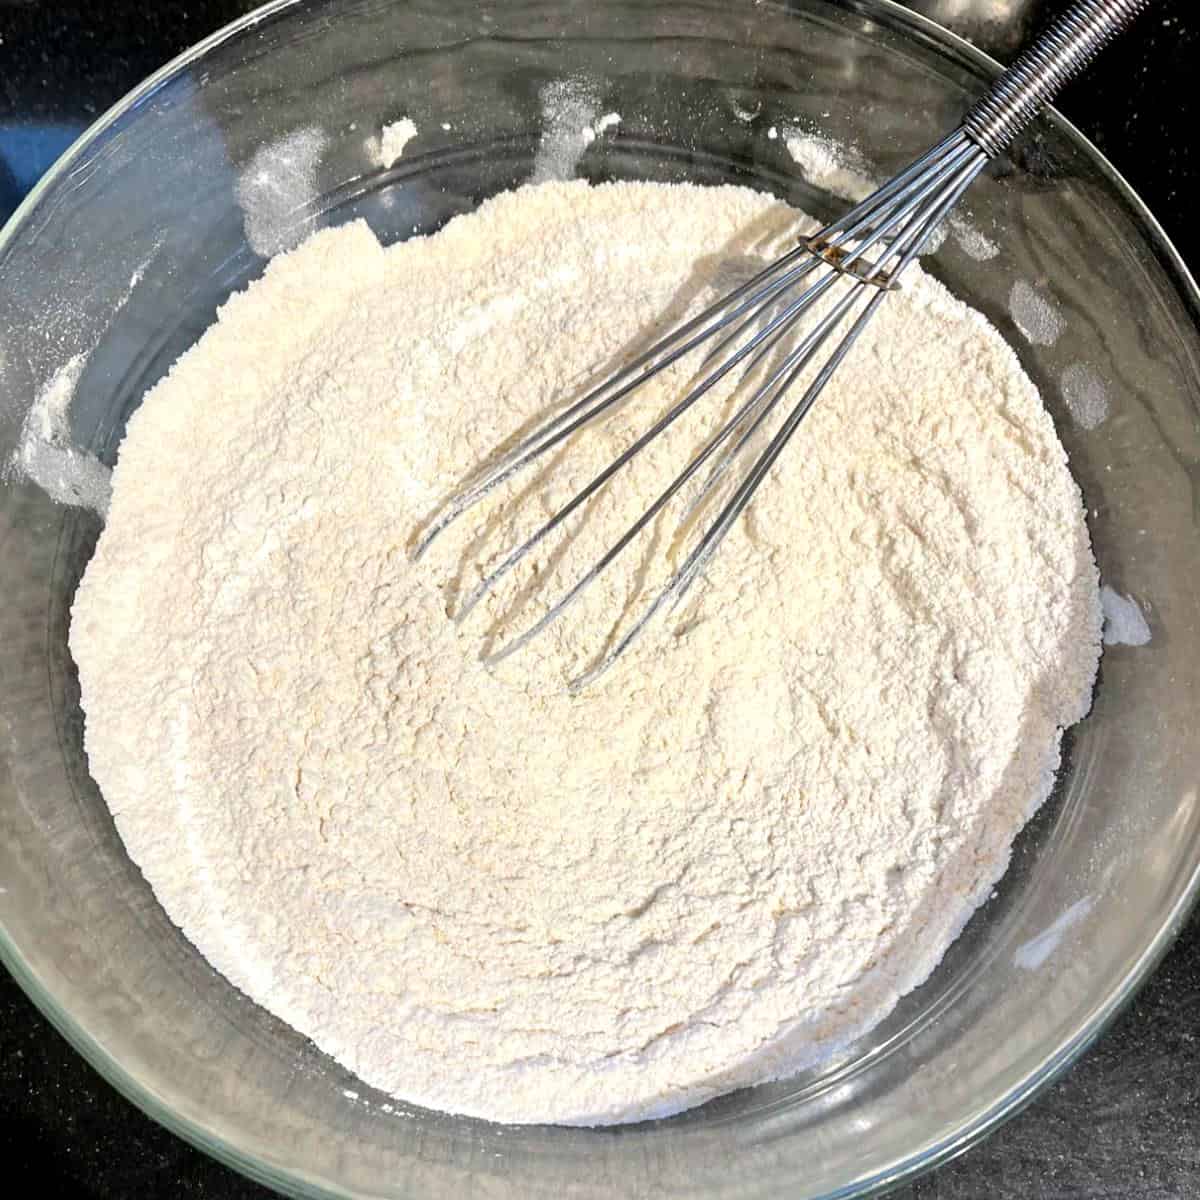 Flours whisked in bowl for Irish hand pies.